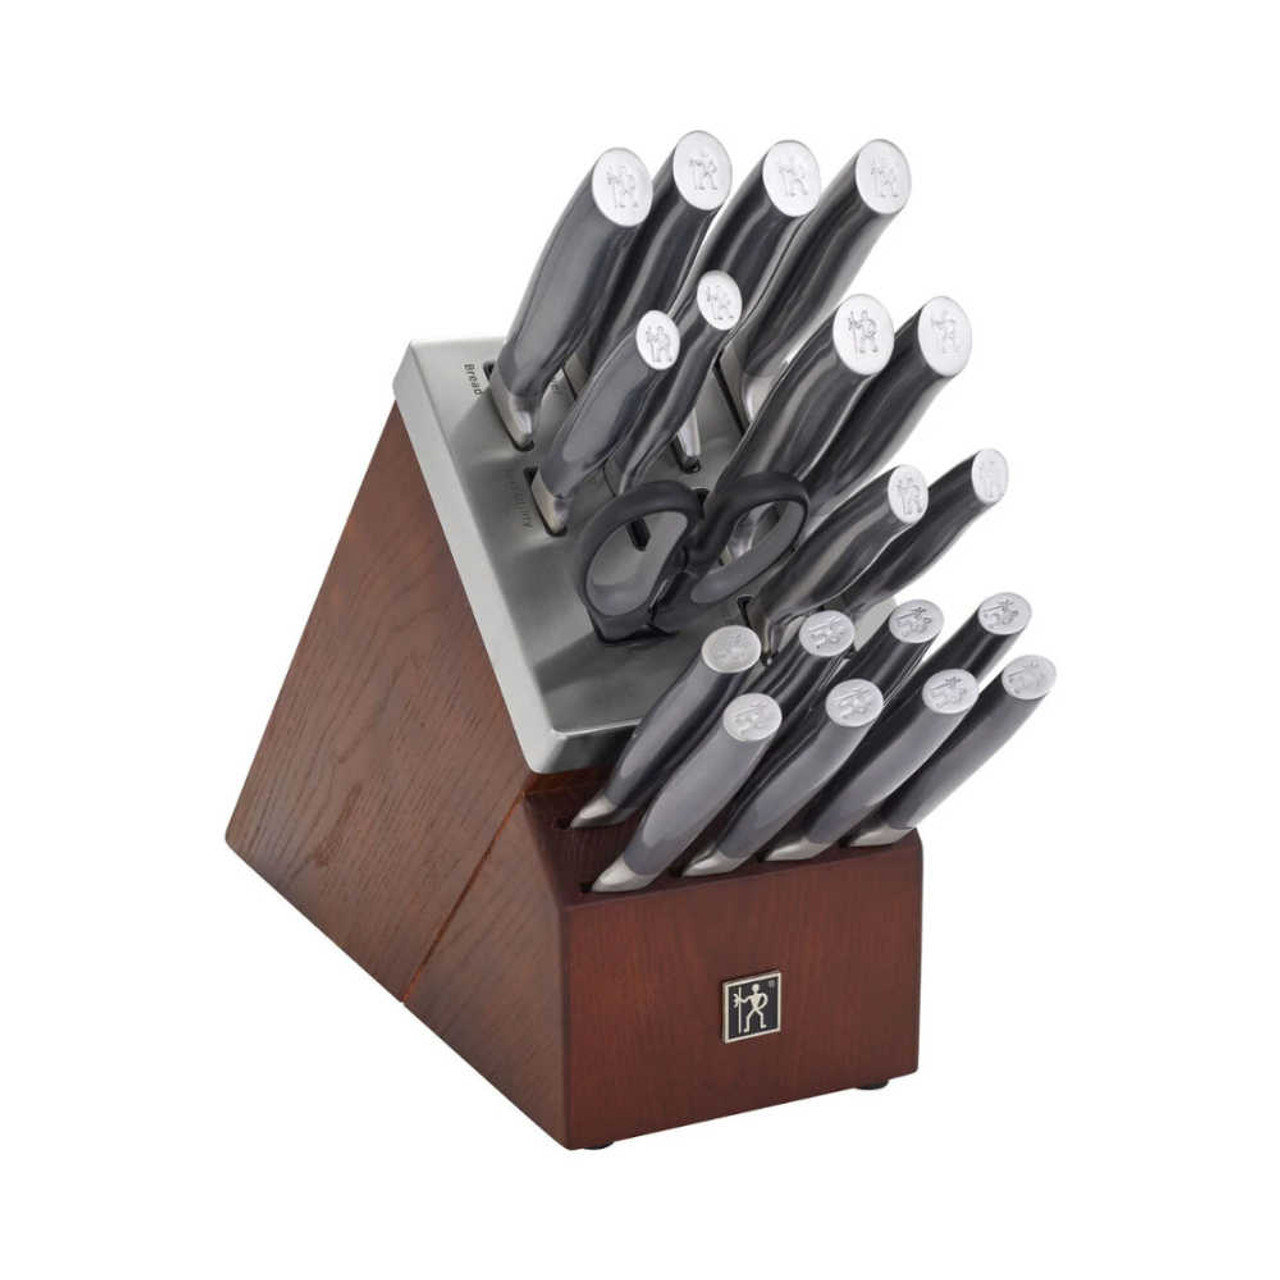 https://cdn11.bigcommerce.com/s-hccytny0od/images/stencil/1280x1280/products/5184/22373/Henckels_Graphite_20-Piece_Self-Sharpening_Knife_Block_Set_1__41943.1669146795.jpg?c=2?imbypass=on